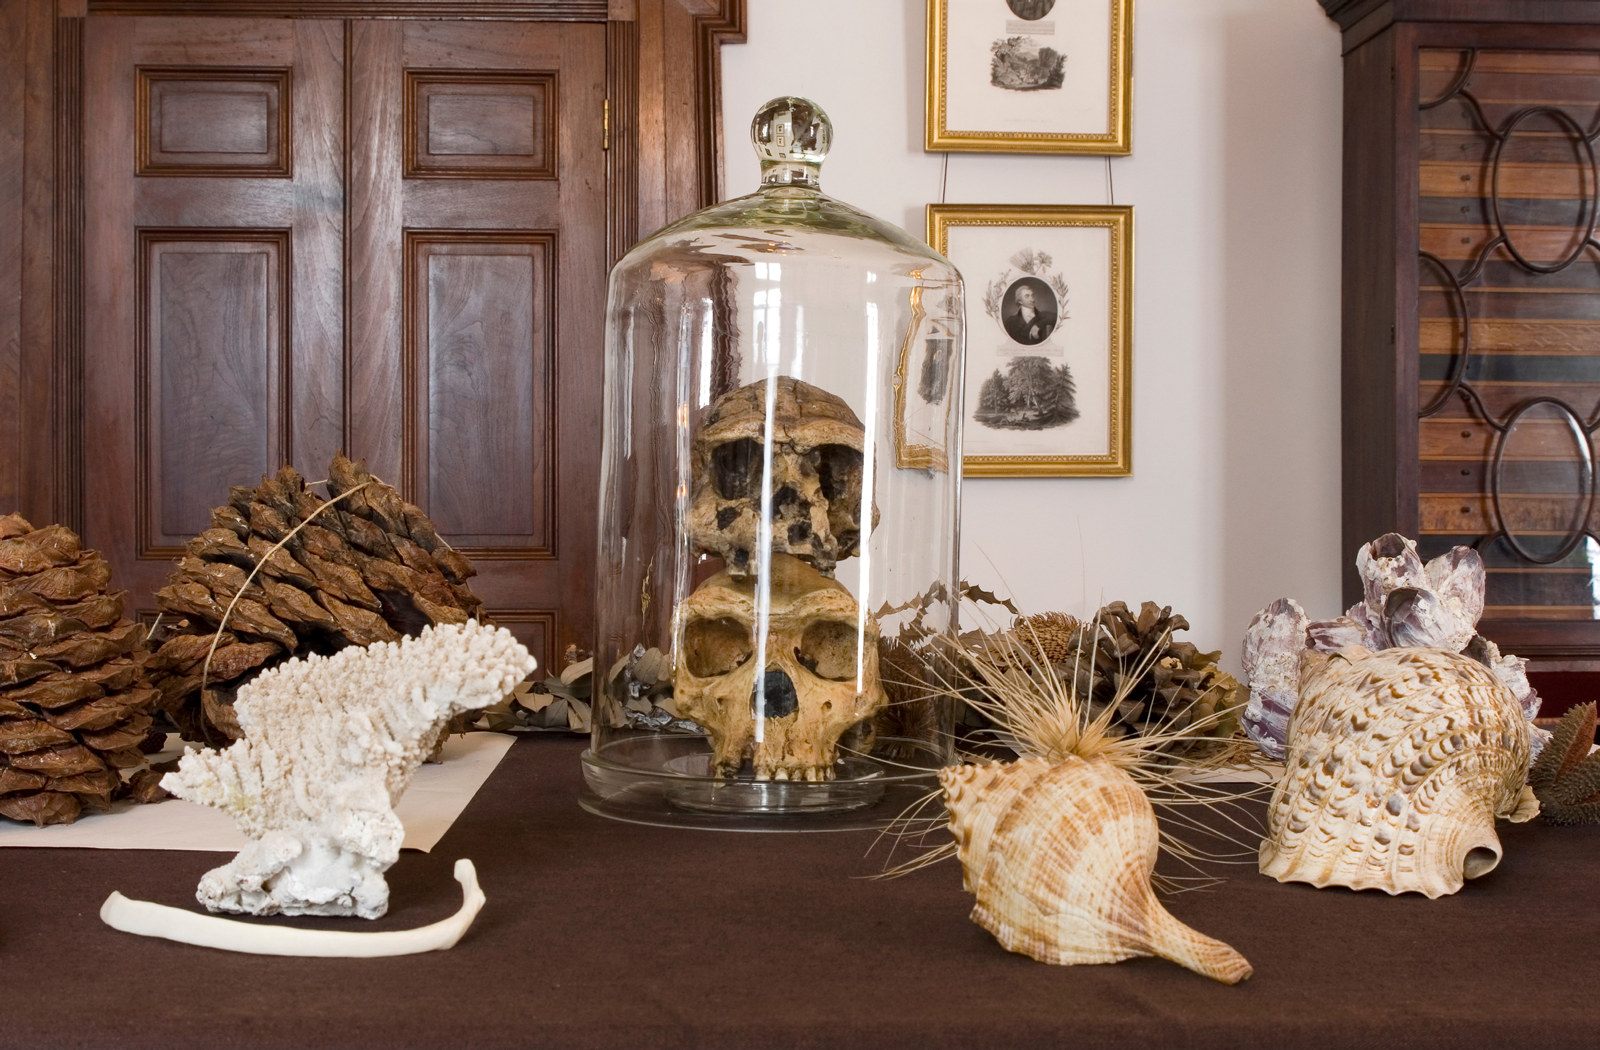 Skulls and other objects positioned as a 19th century display.